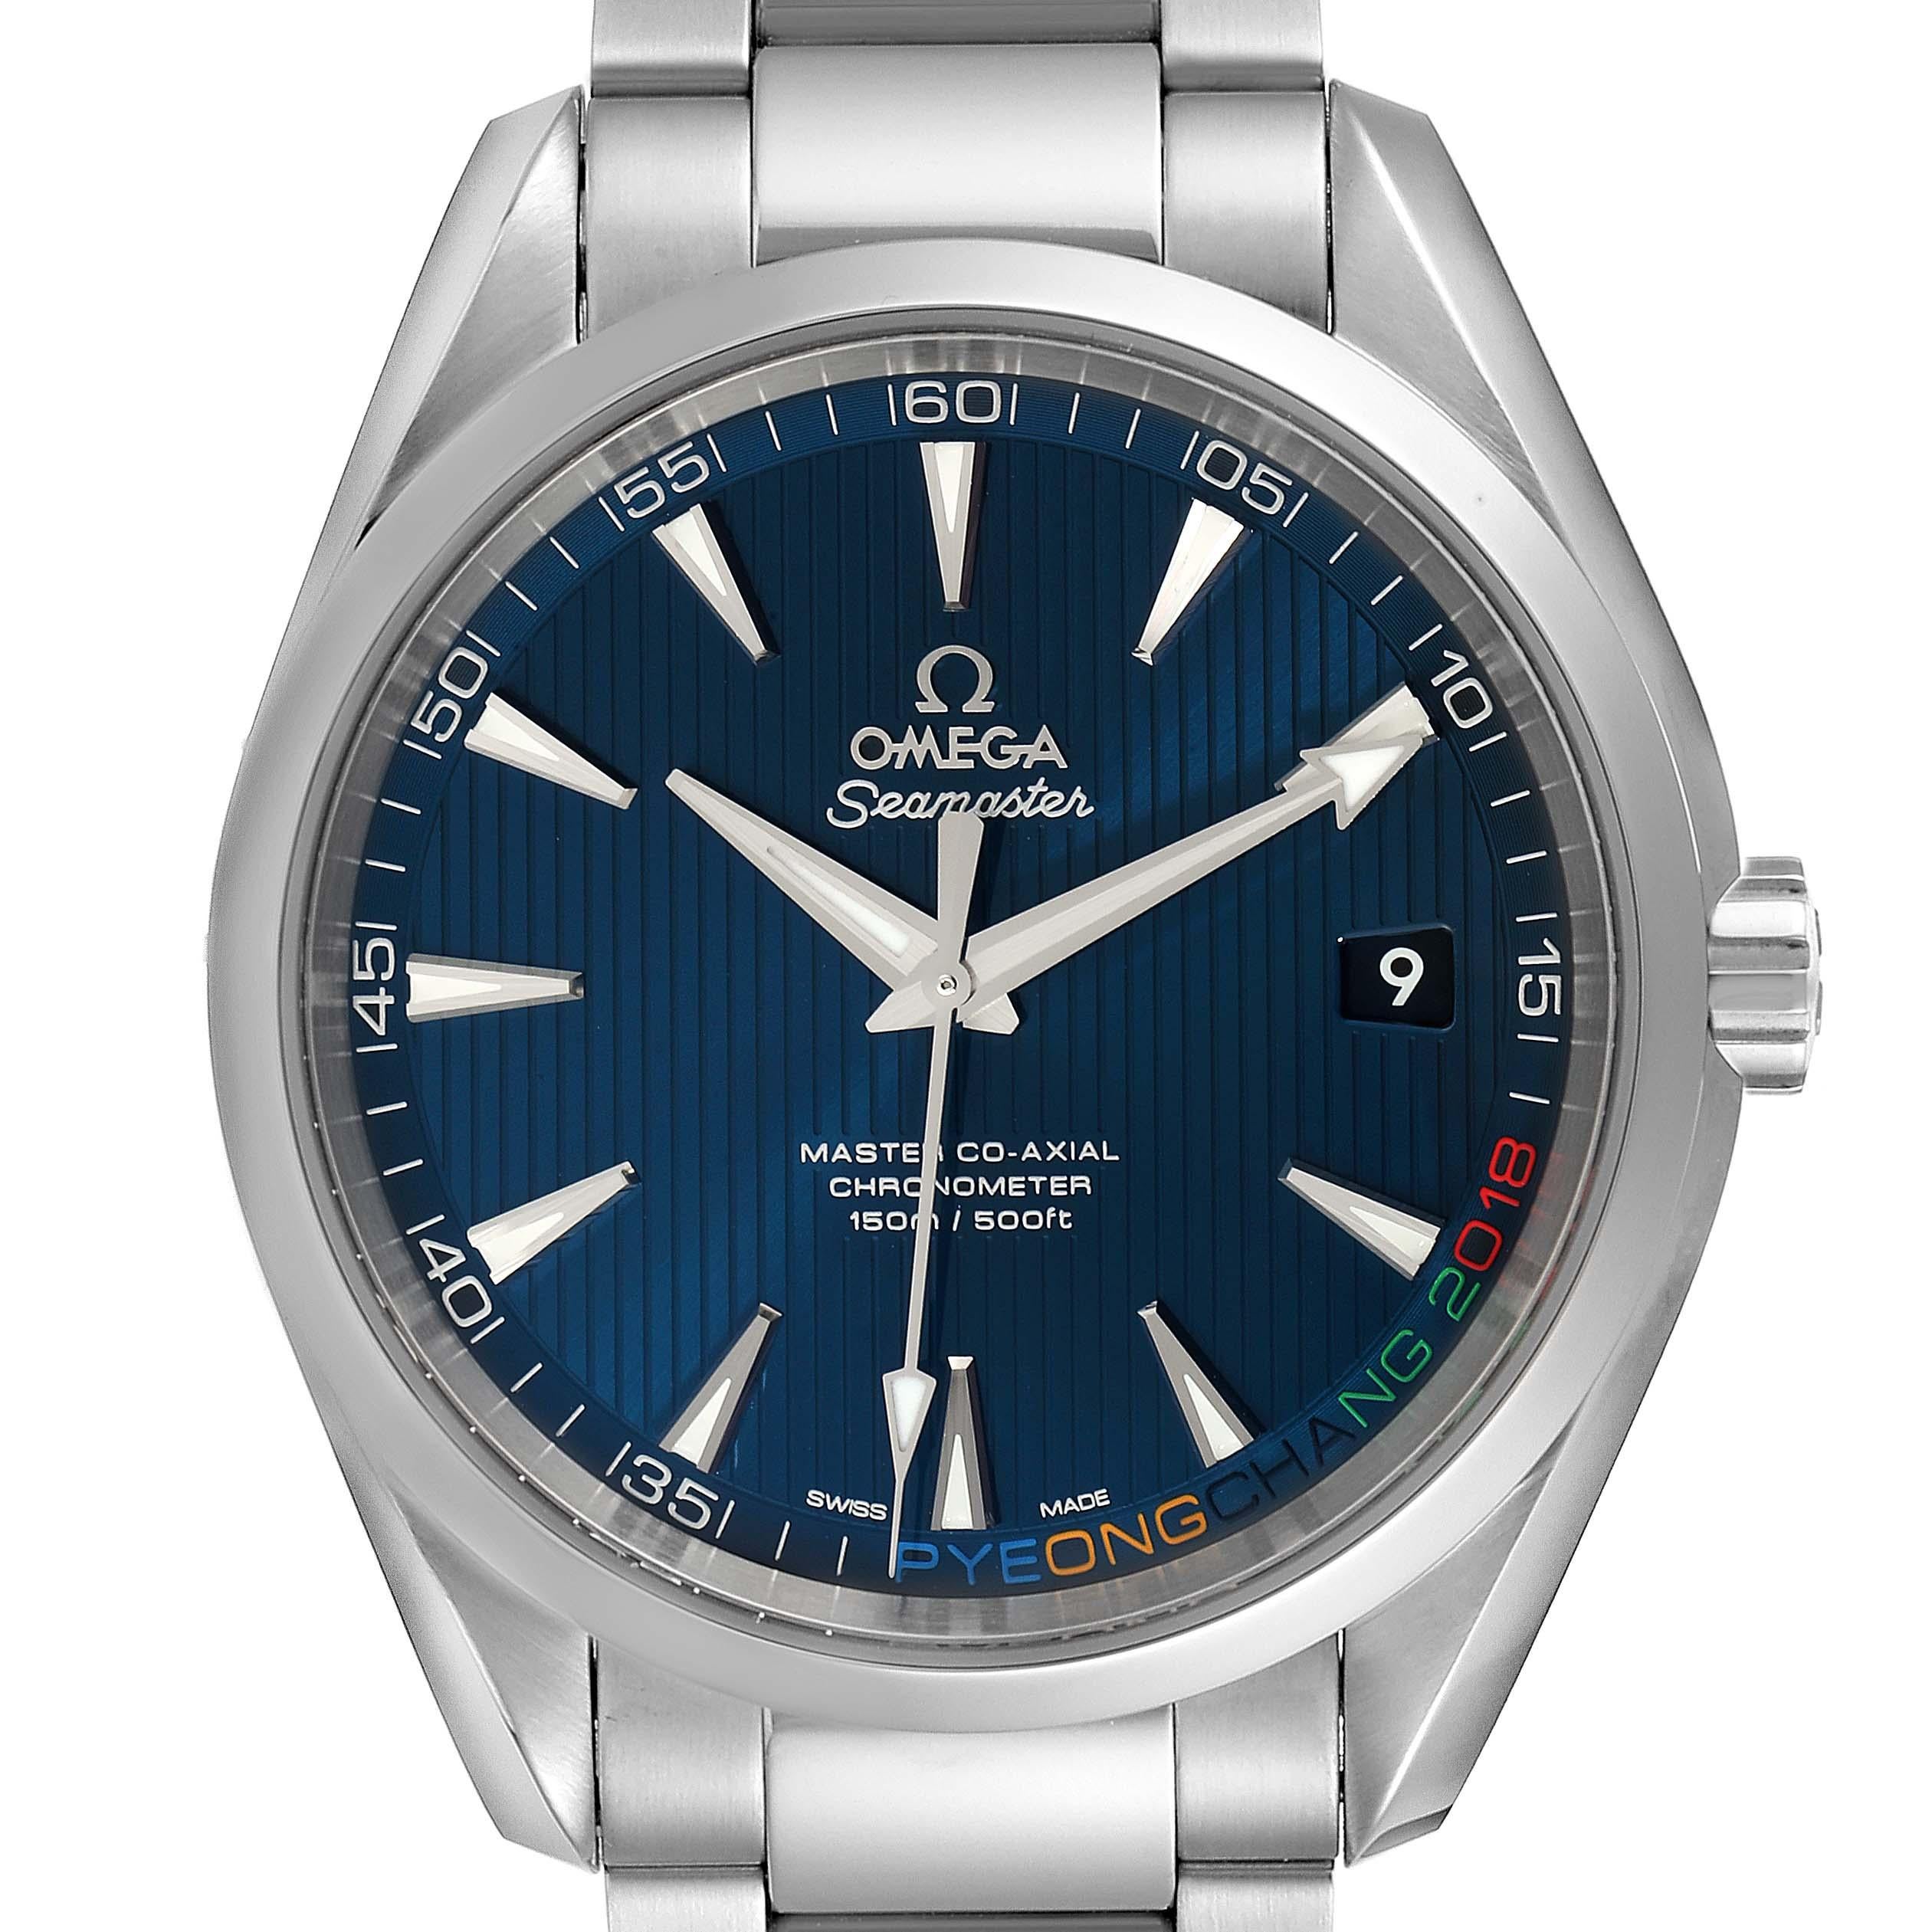 Omega Seamaster Aqua Terra Olympic Edition Watch 522.10.42.21.03.001 Unworn. Automatic self-winding movement. Stainless steel round case 41.5 mm in diameter. Exhibition sapphire crystal case back. “Olympic Games PyeongChang 2018” logo. The limited